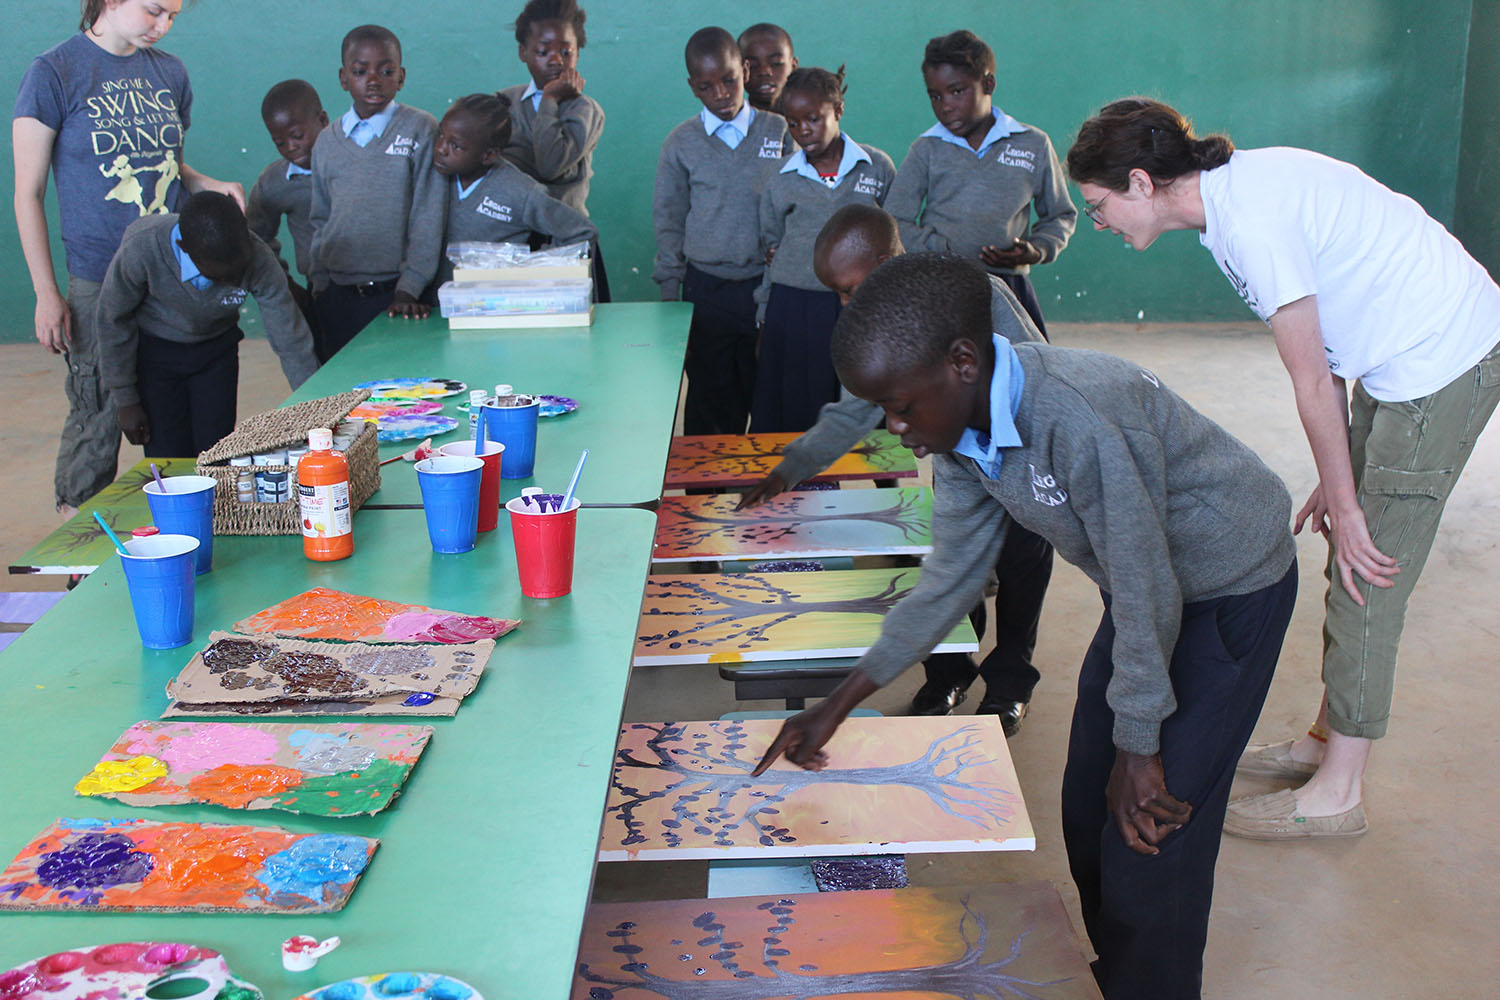 Students at Legacy Academy added their fingerprints to canvases as leaves on the trees. The paintings raised more than $45,000 for the Tree of Life Children's Village near Lusaka, Zambia. (Photo/Baylor University)